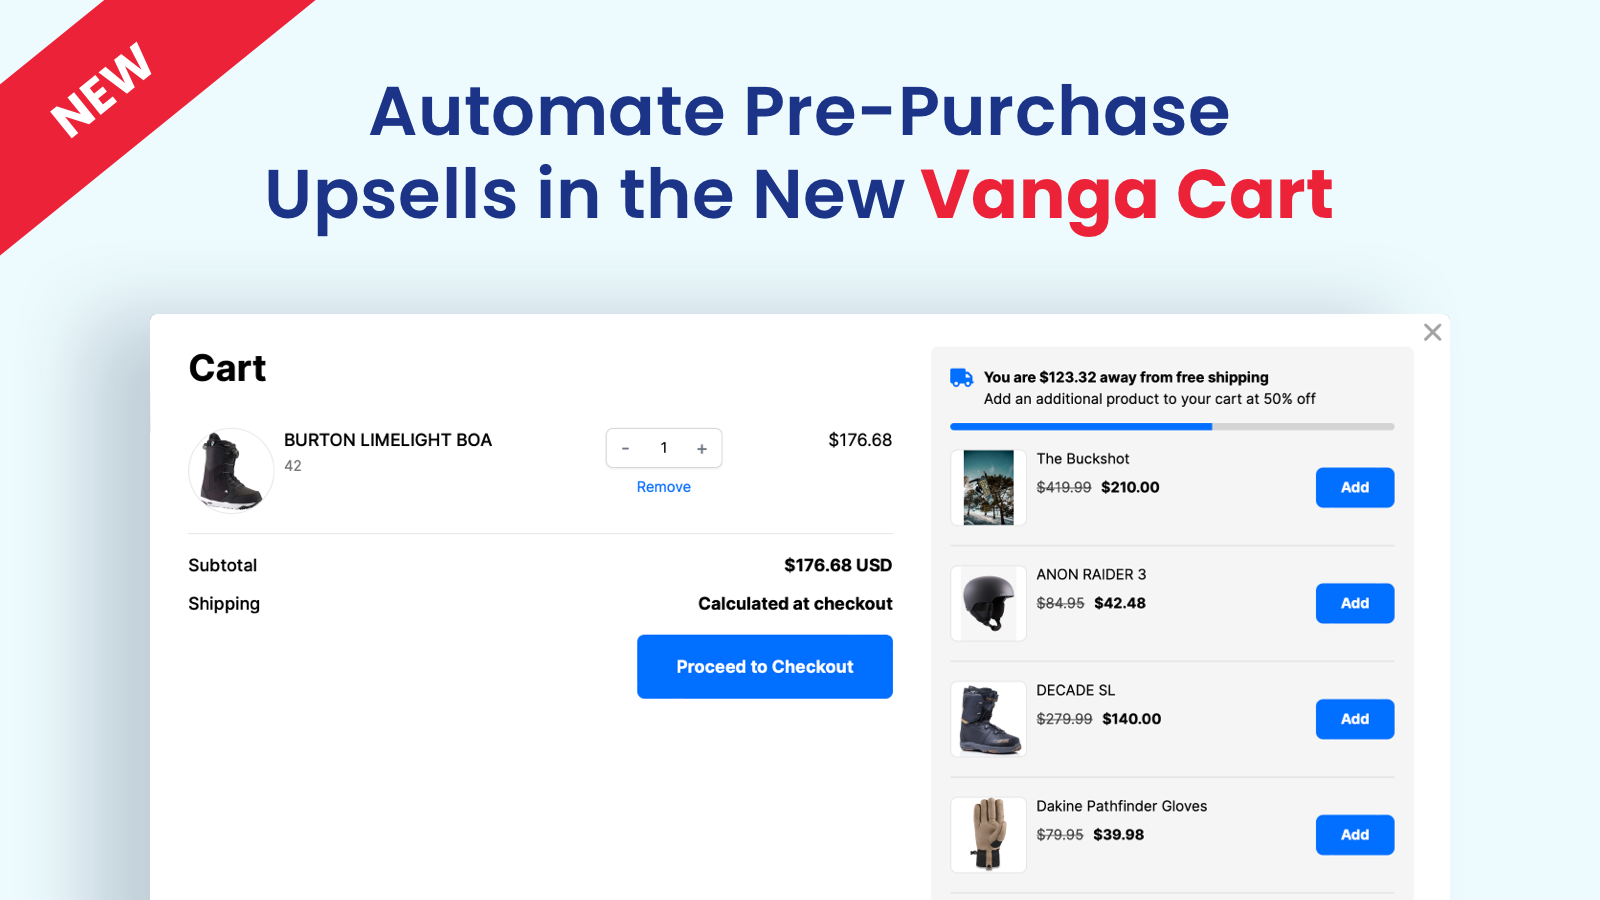 Automate pre-purchase upsells in the new cart